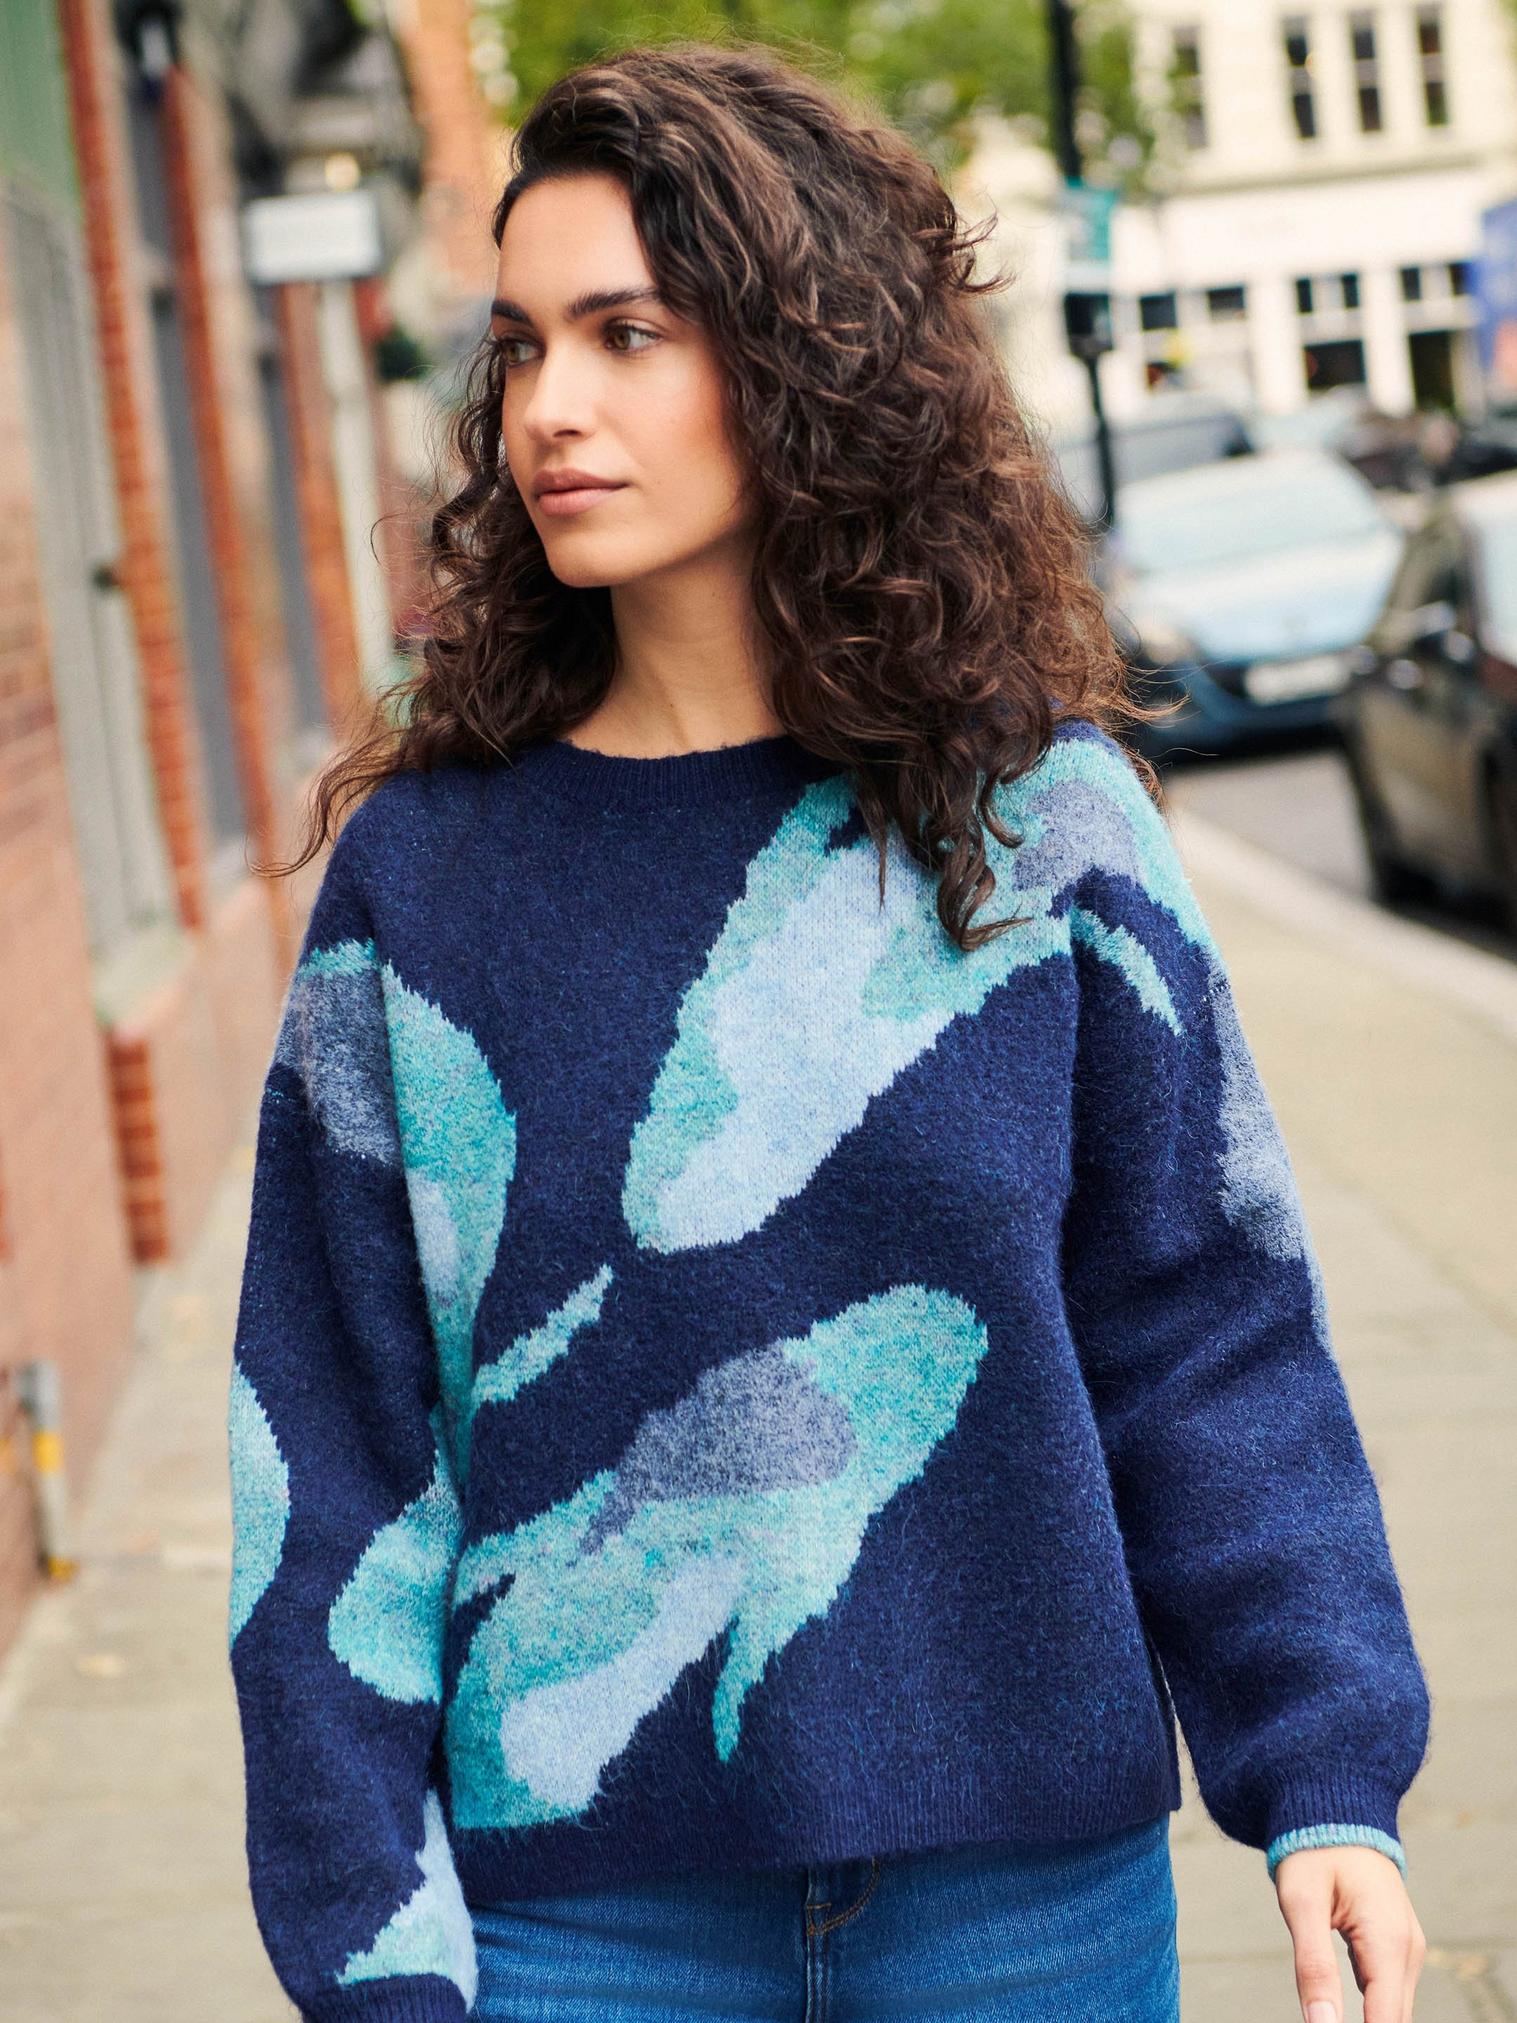 ABSTRACT KOI JUMPER in NAVY MULTI - MIXED